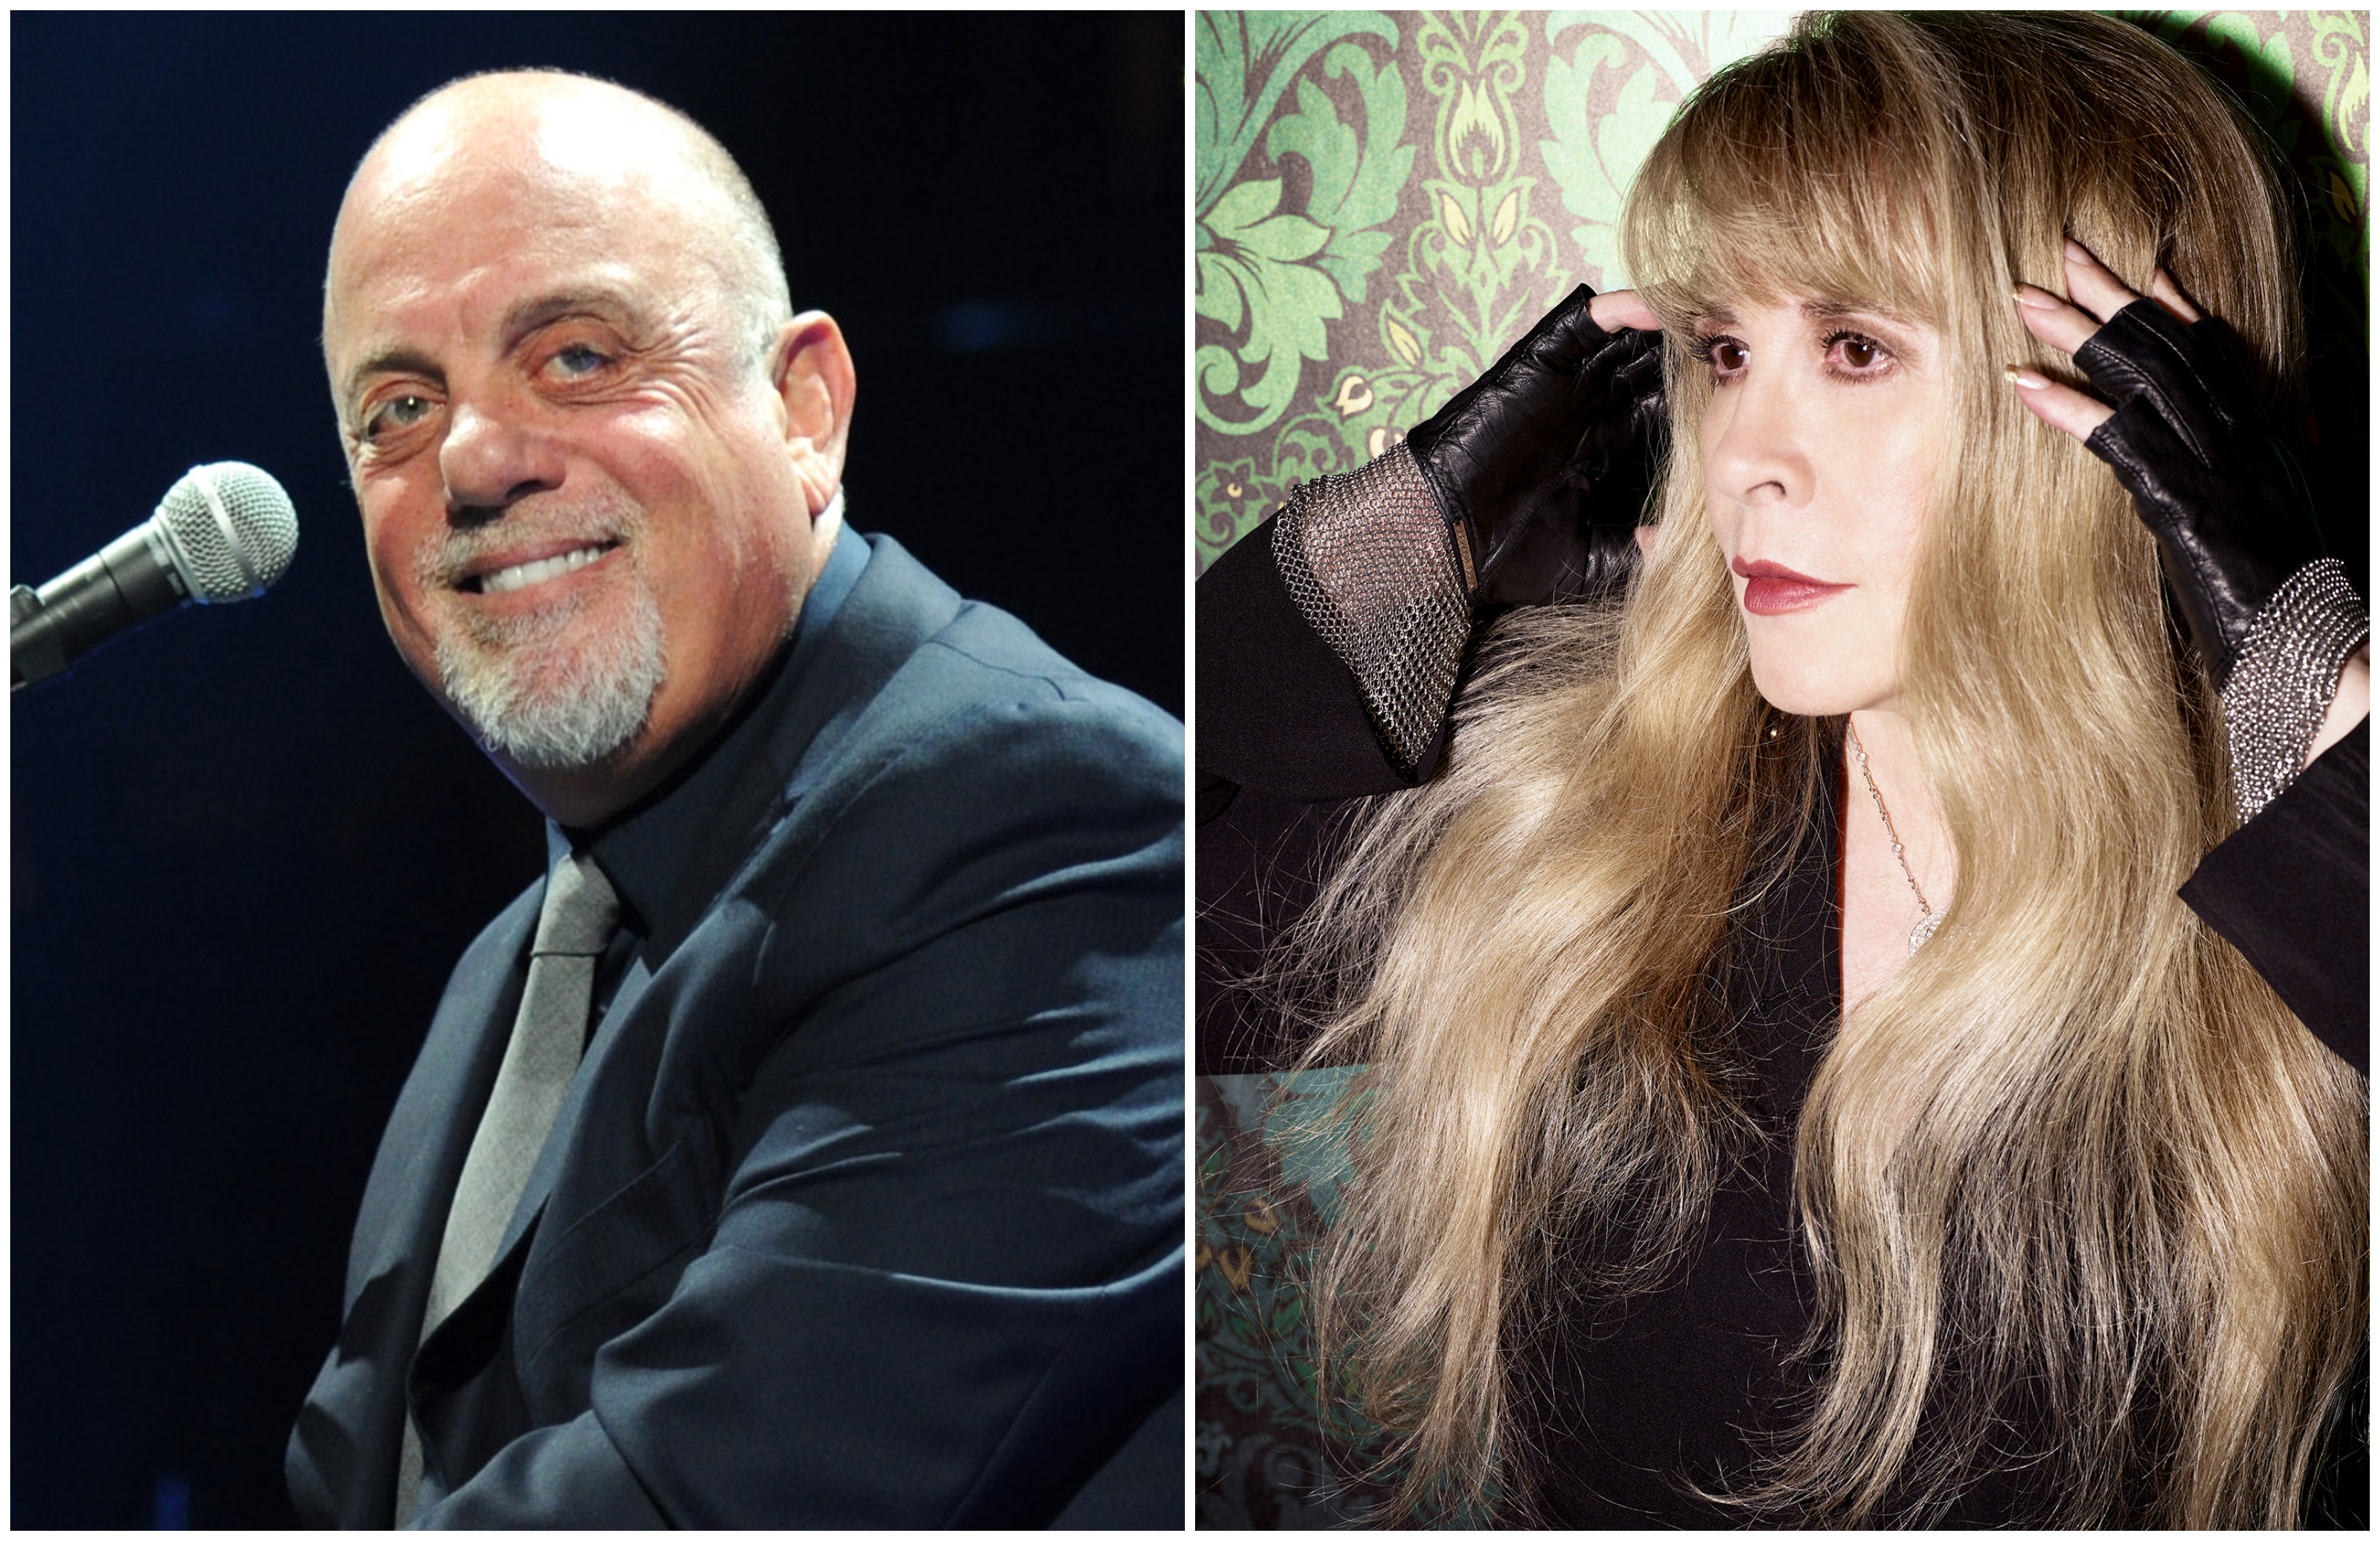 Stevie Nicks and Billy Joel co-headline tour named "Two Icons, One Night" to begin in March this year